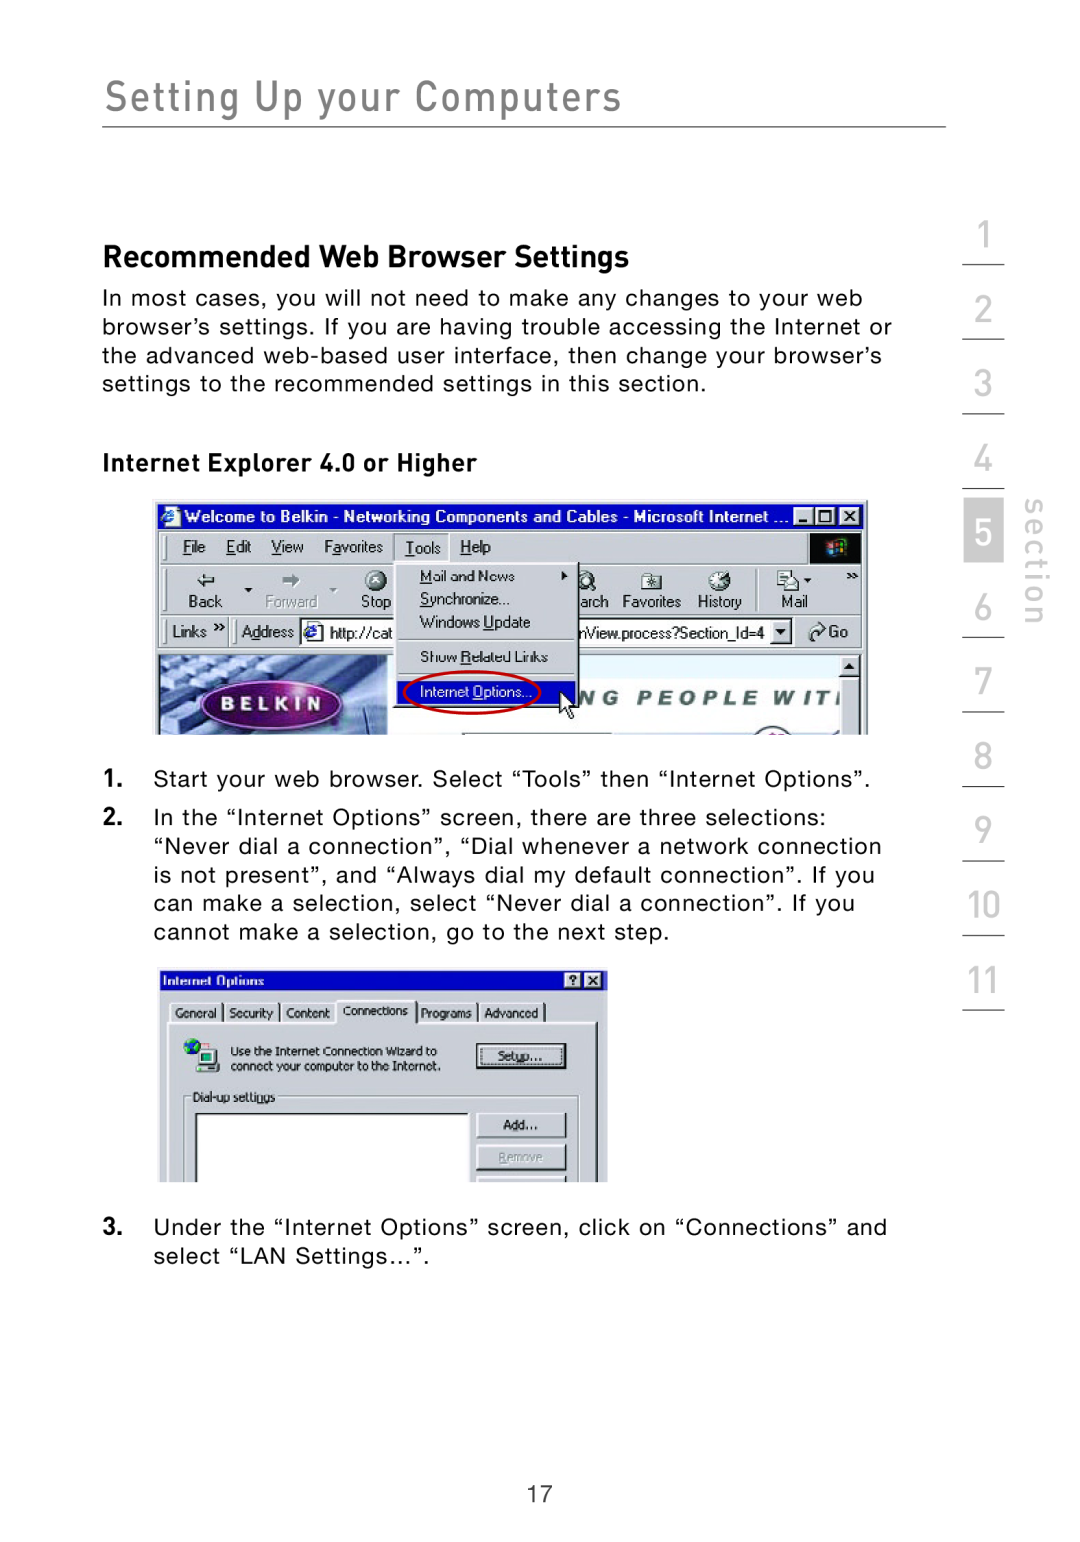 Belkin Pre-N manual Recommended Web Browser Settings, Internet Explorer 4.0 or Higher, Setting Up your Computers, section 